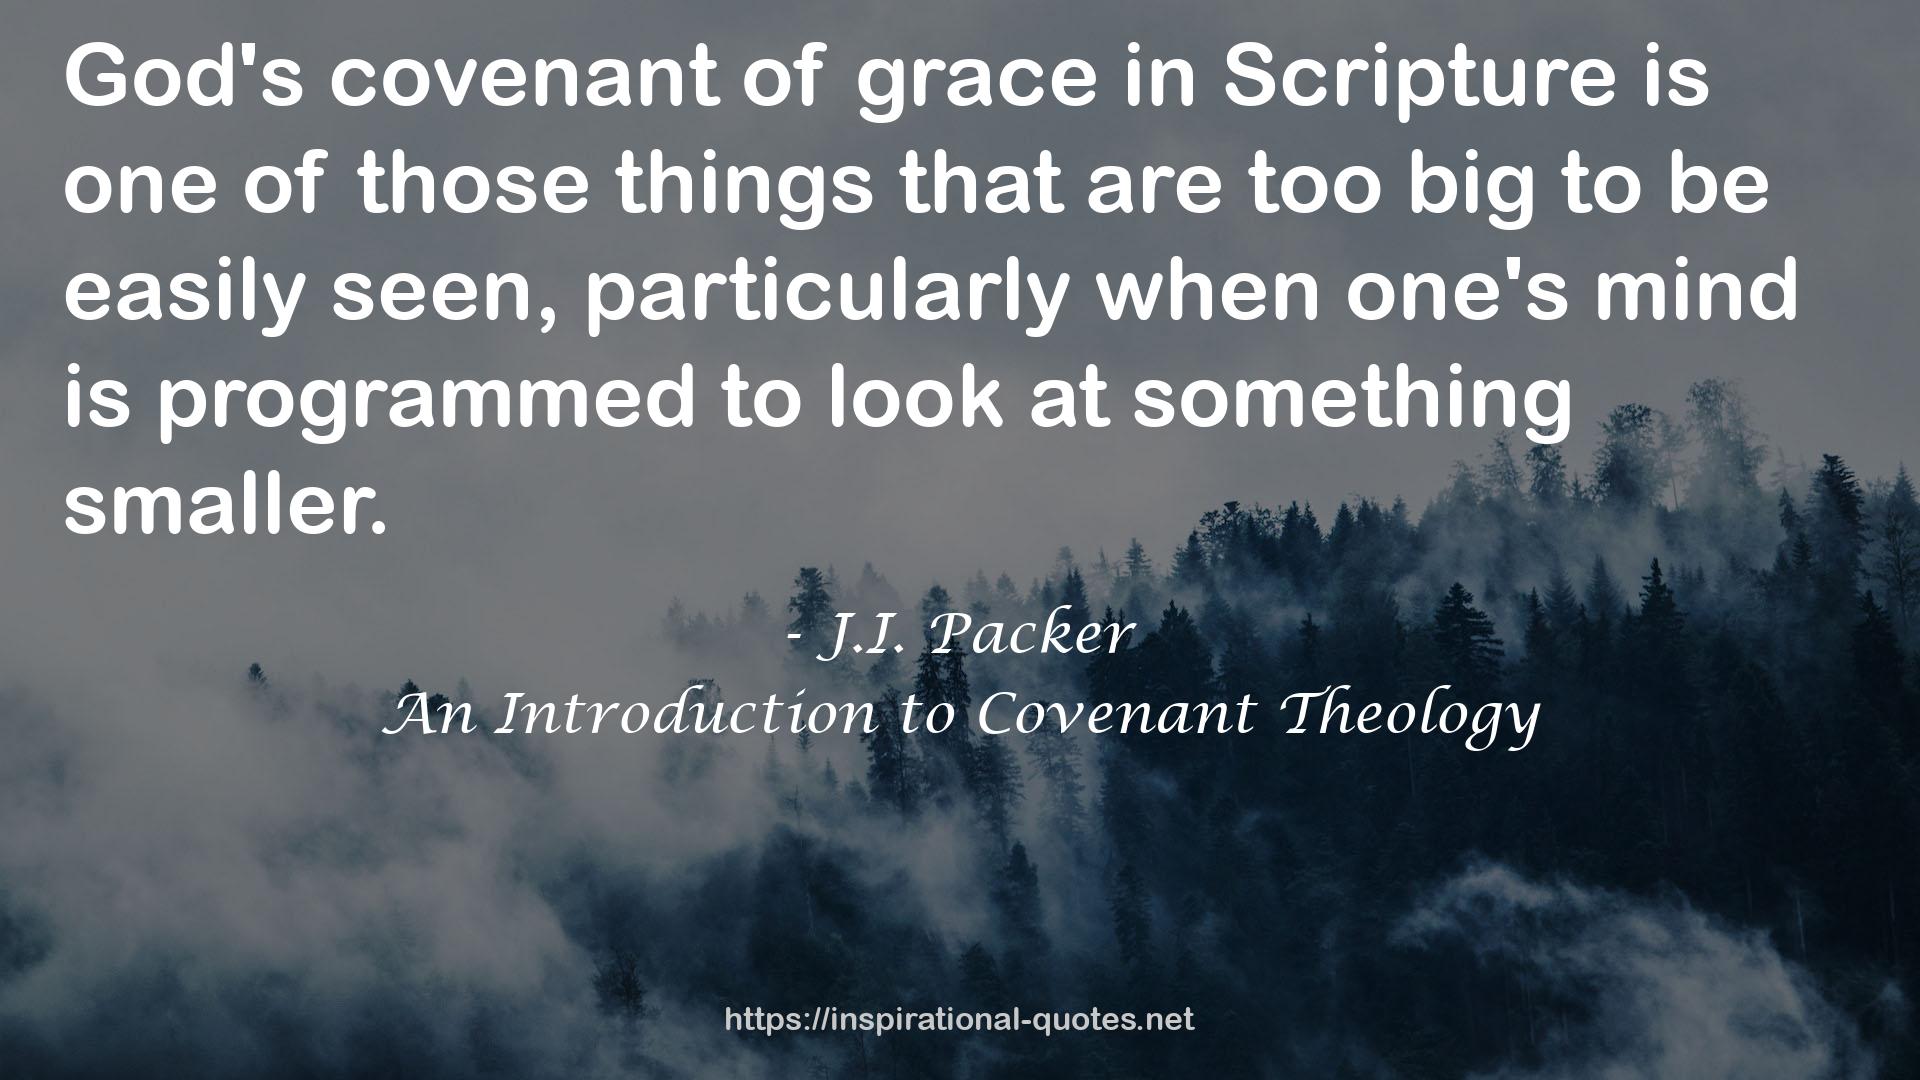 An Introduction to Covenant Theology QUOTES